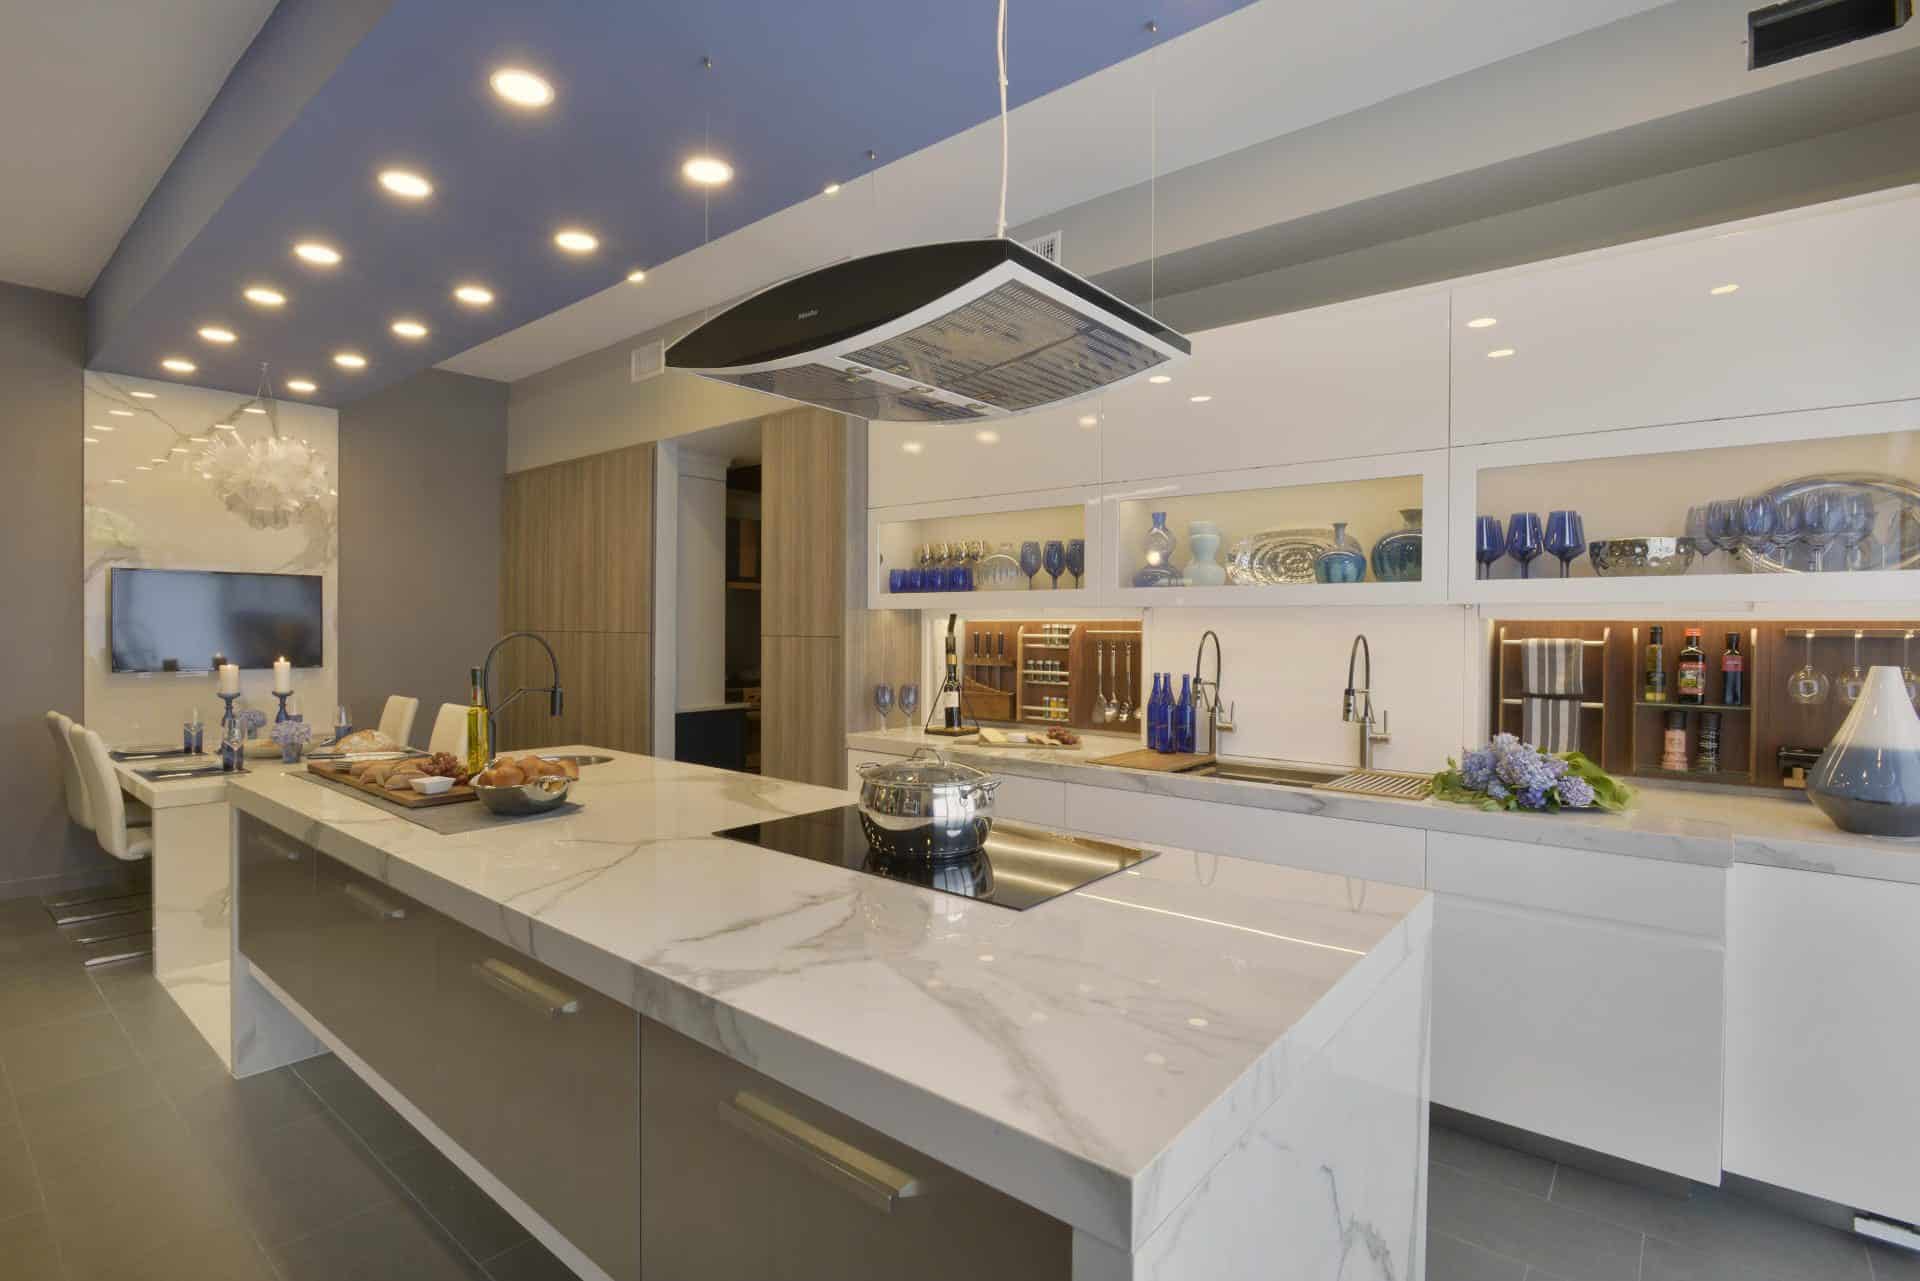 Custom kitchen features waterfall island with built-in cooktop and sink. 